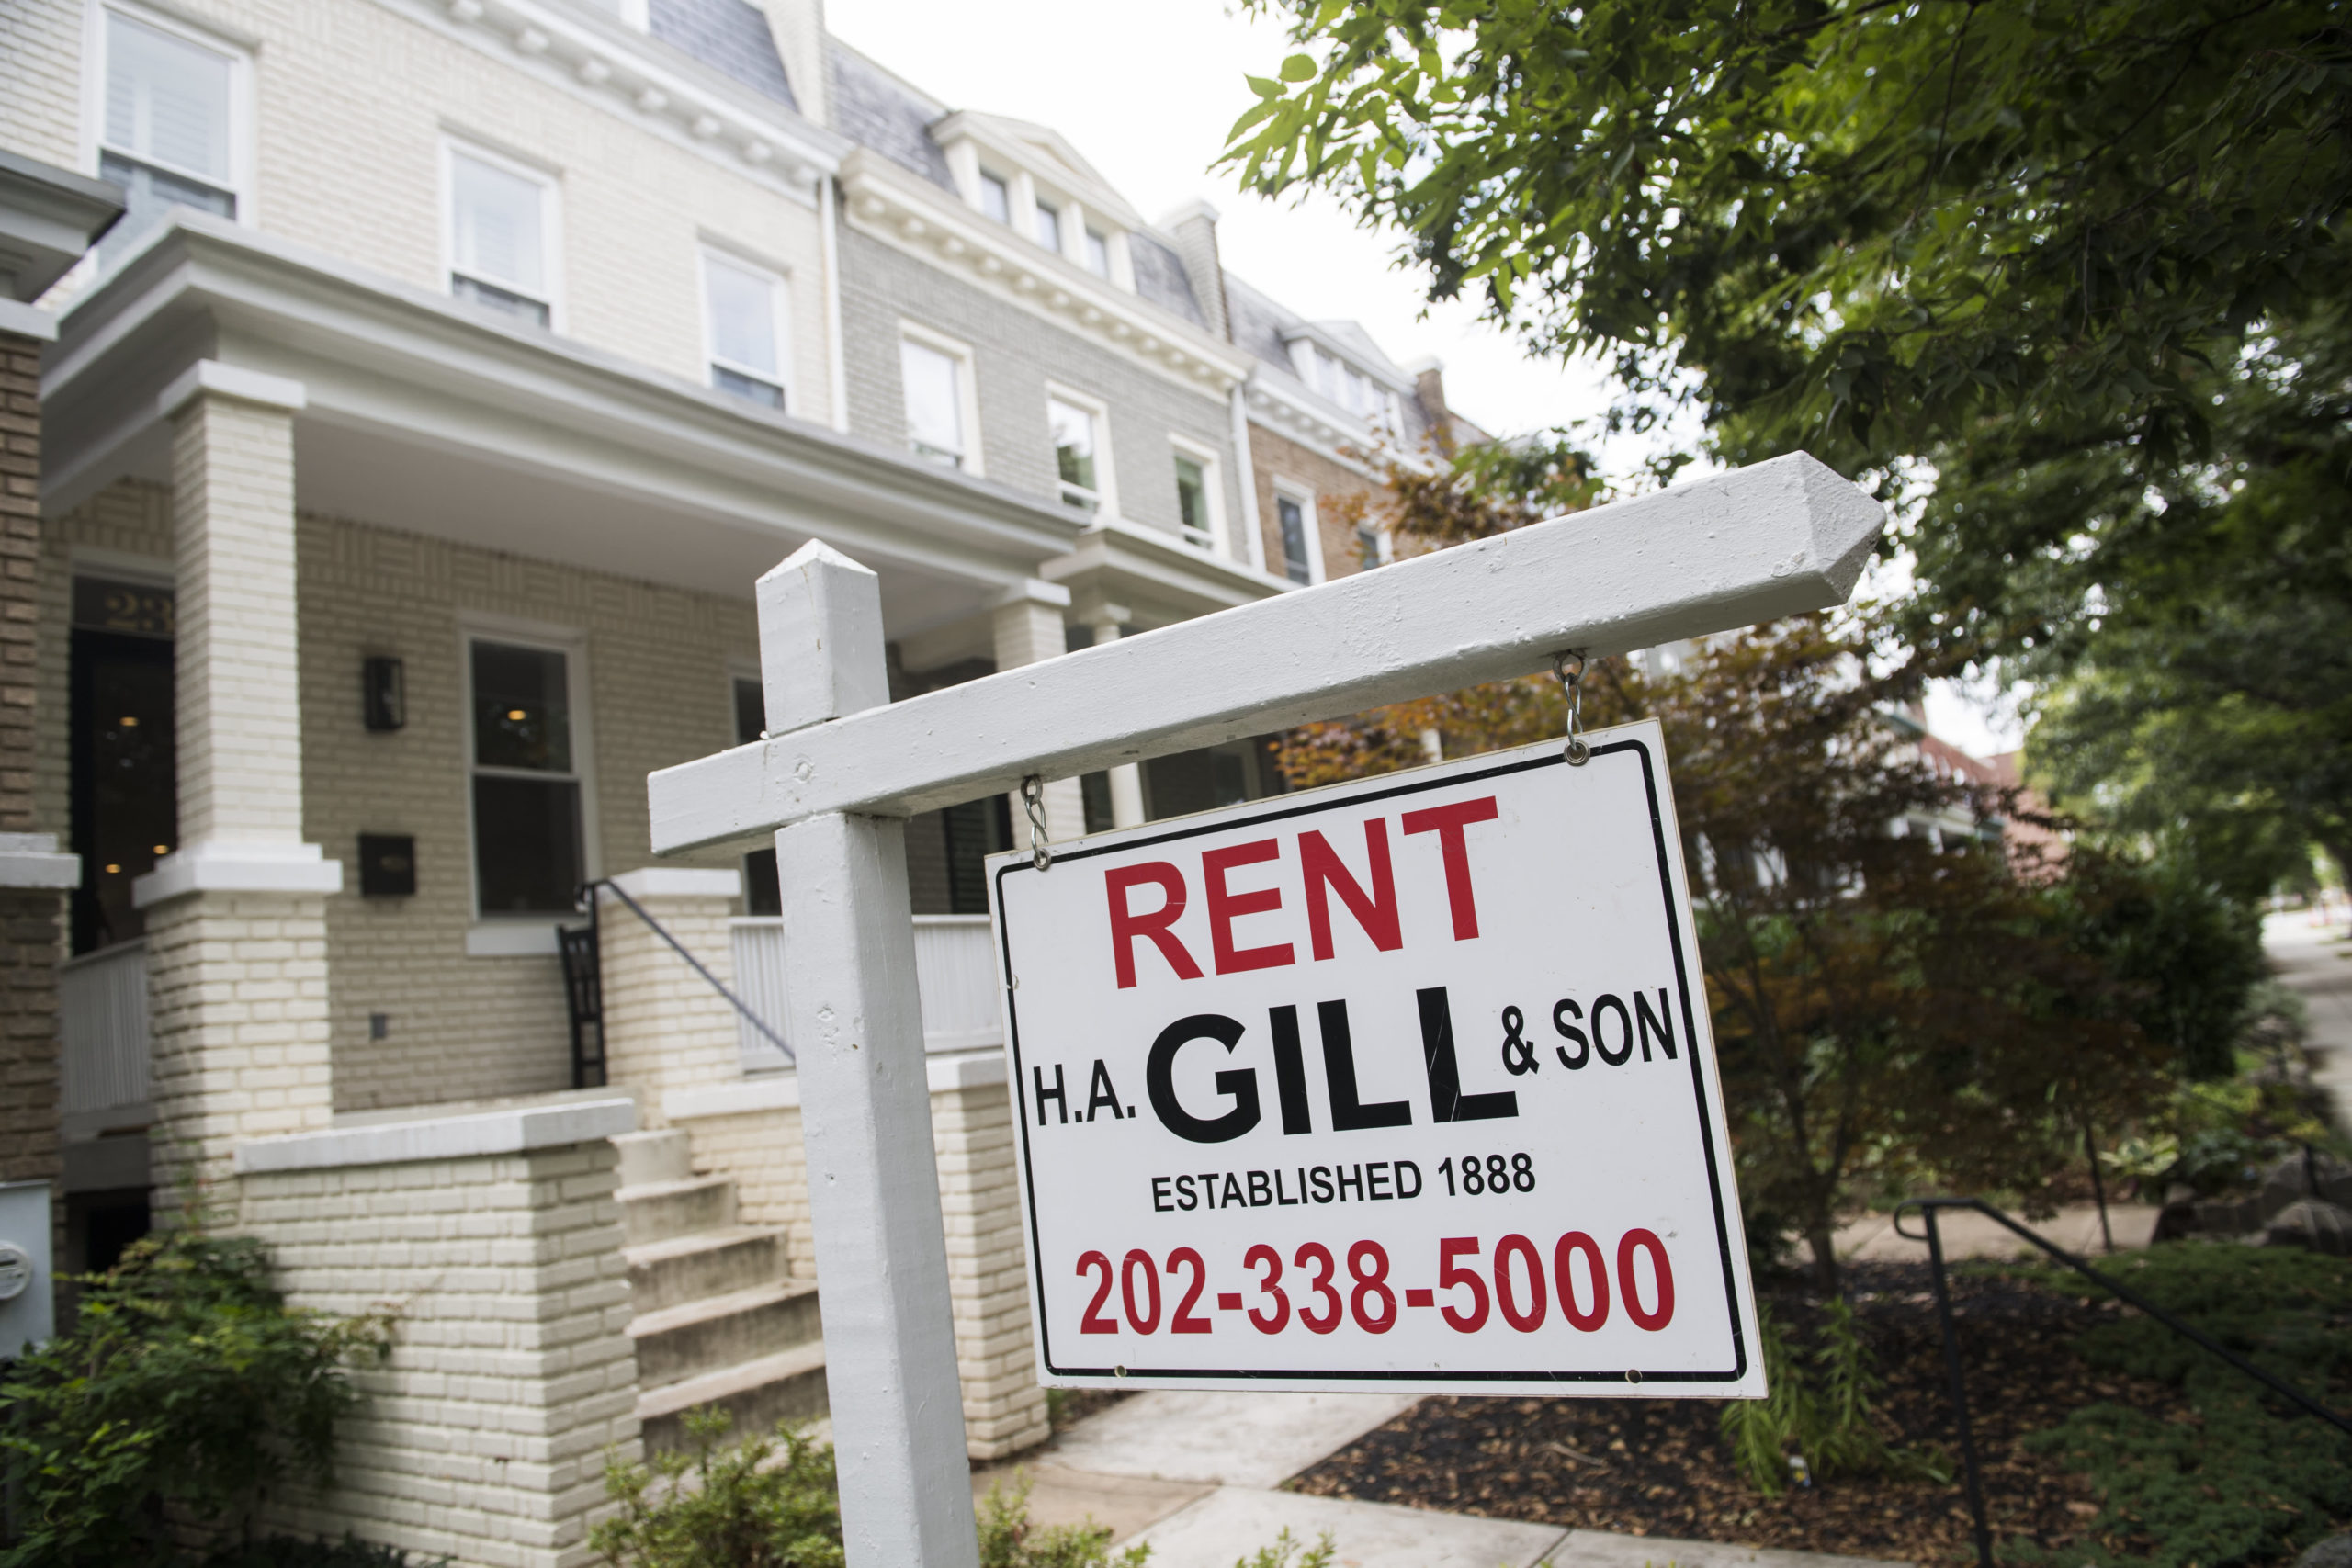 Rents for single-family homes are rising 3 times as fast as 2020